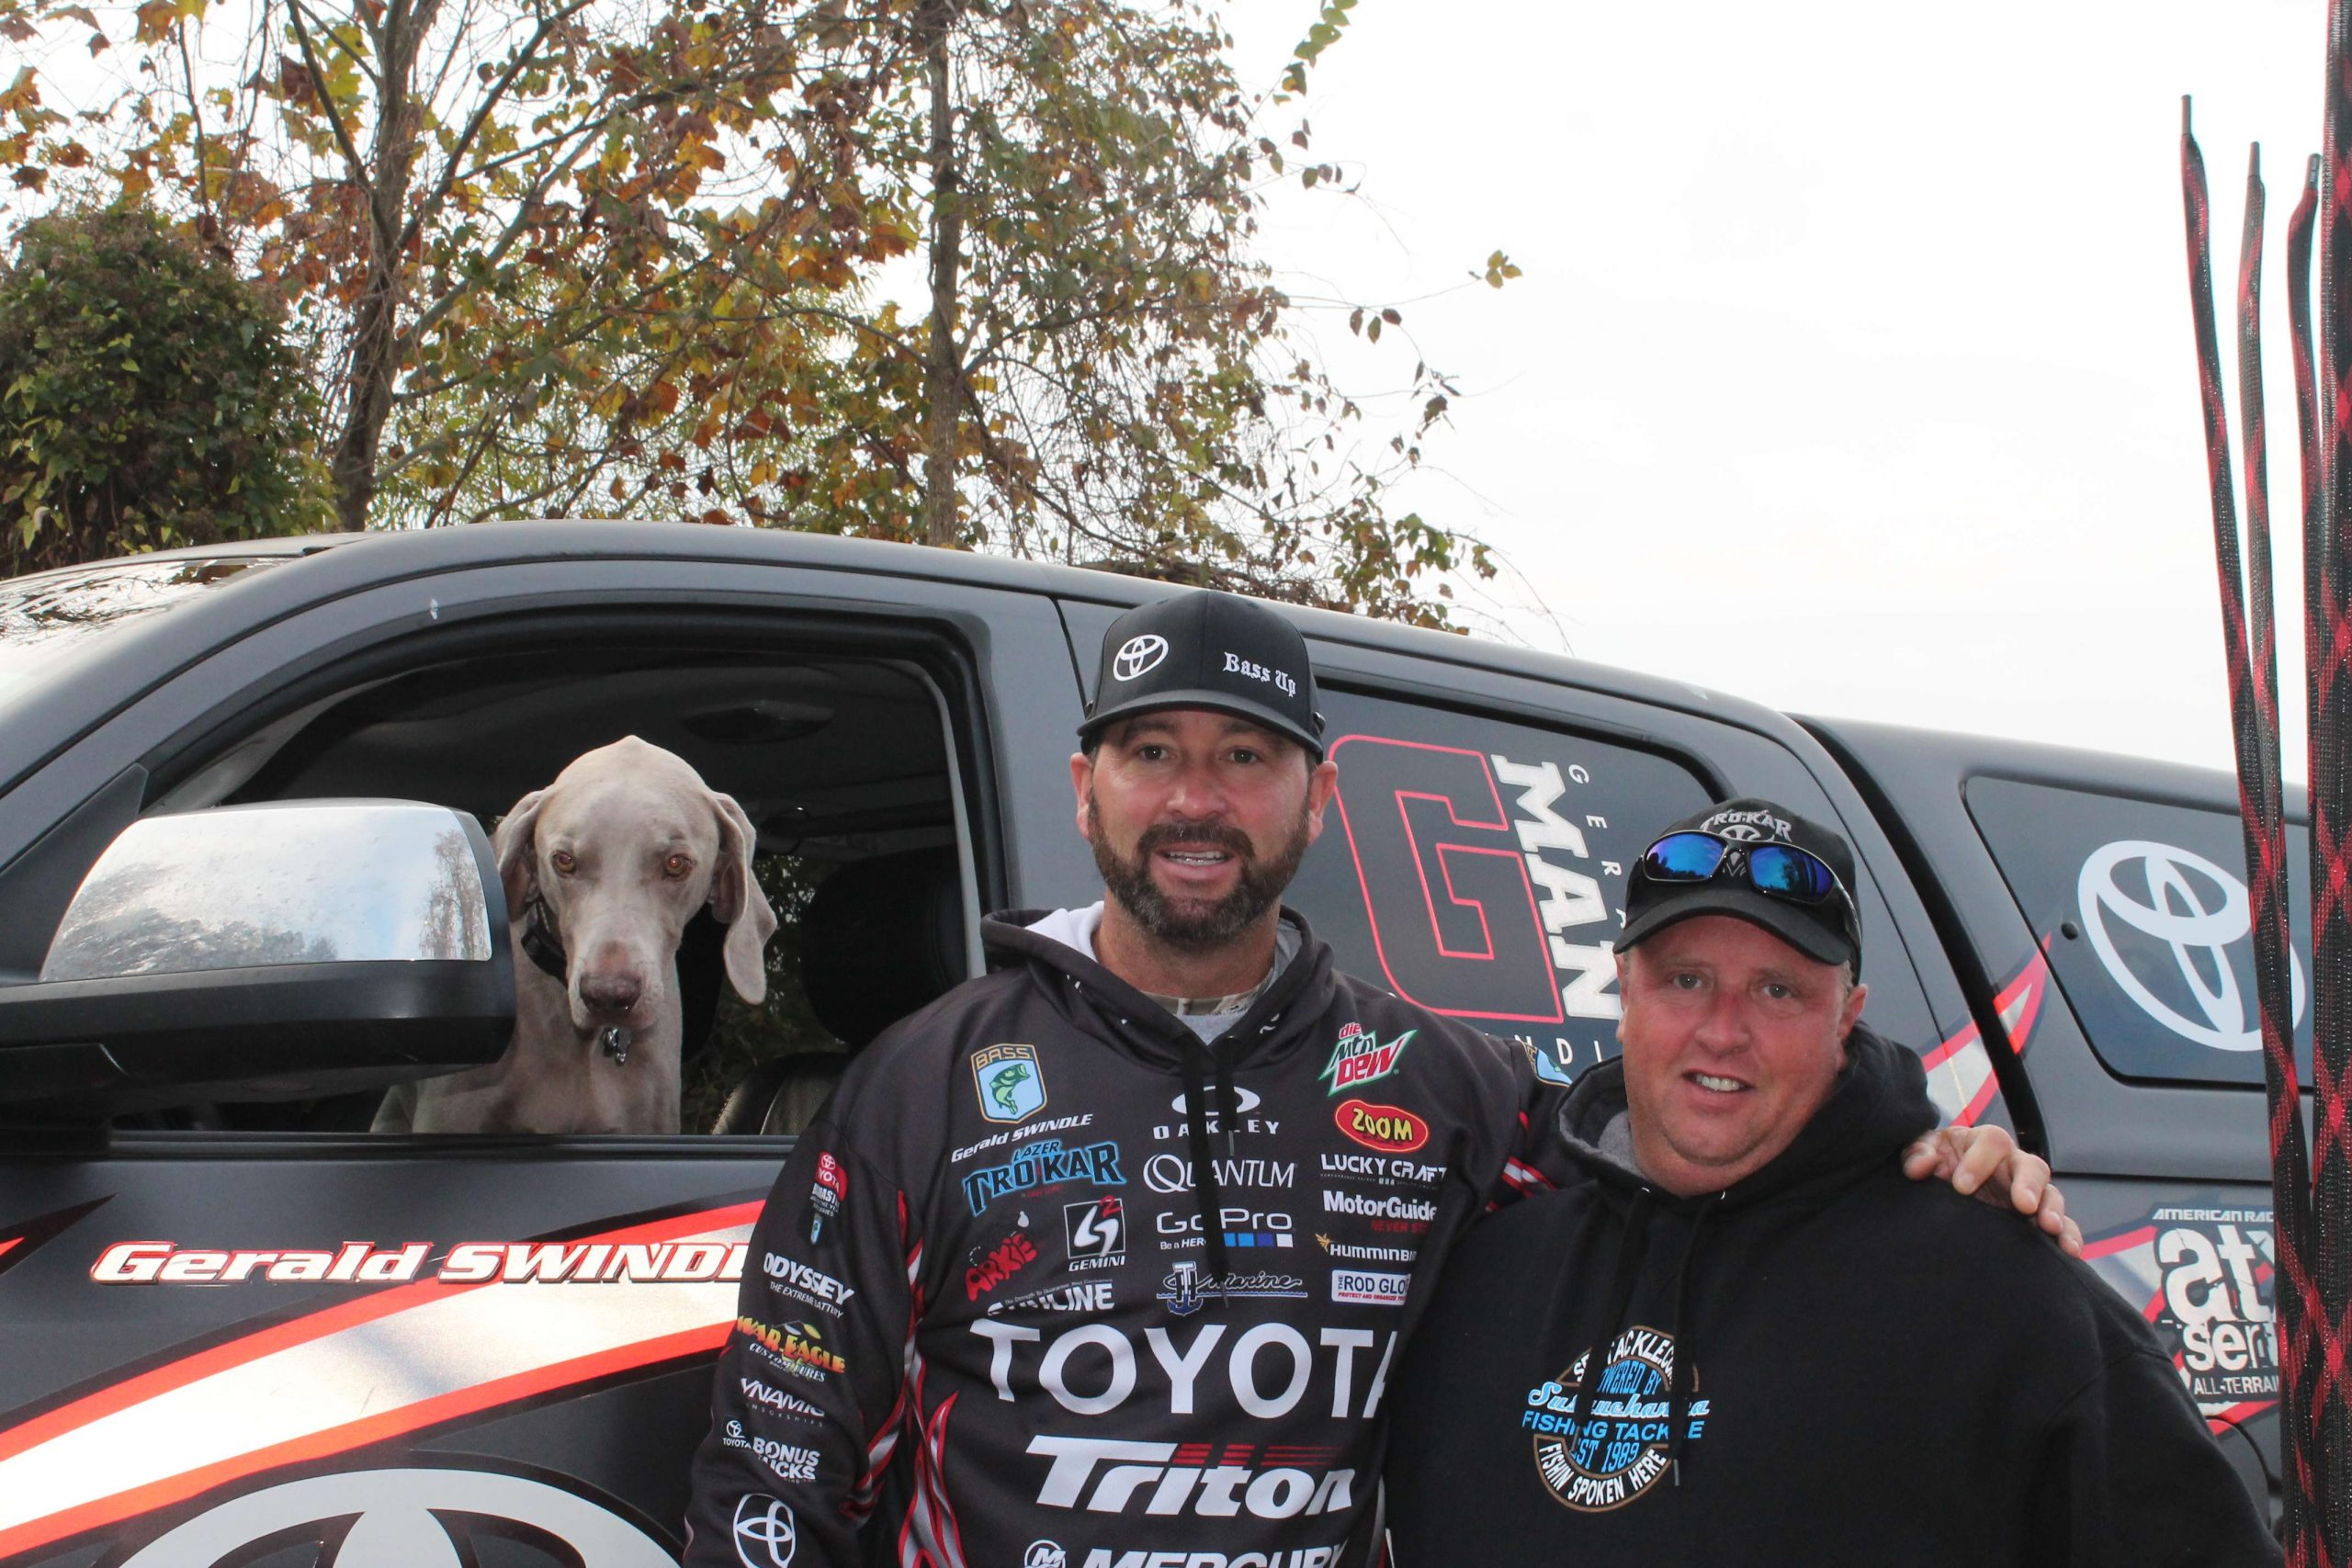 Gerald's dog Myrick was on hand to meet Kenny Wiley, the lucky winner who got to spend the day with G-Man.